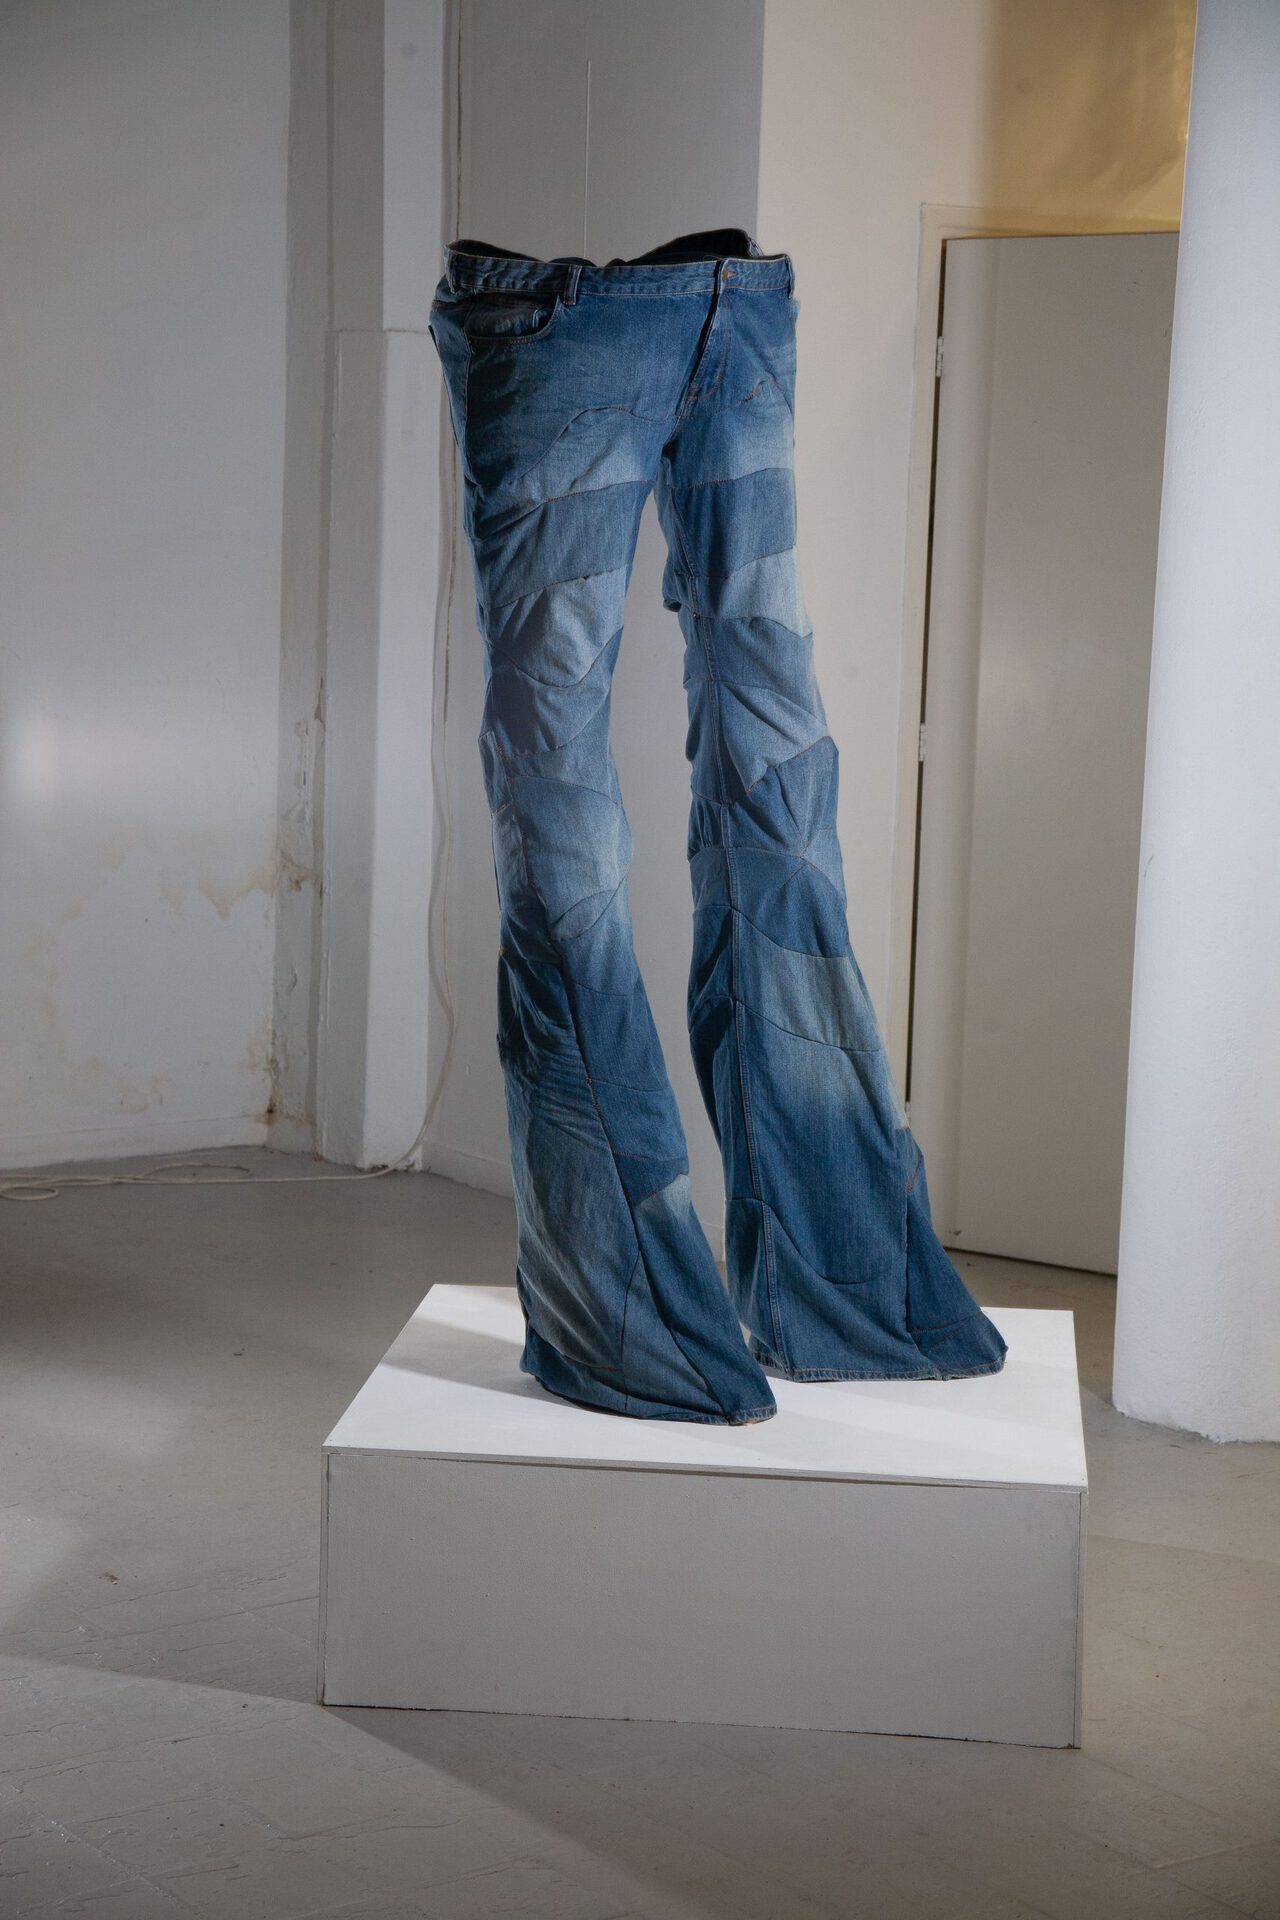 Karin Kytokangas, I really like denim, 2021, dimension needs to be measured, patched denim fabric on wood and stealwire